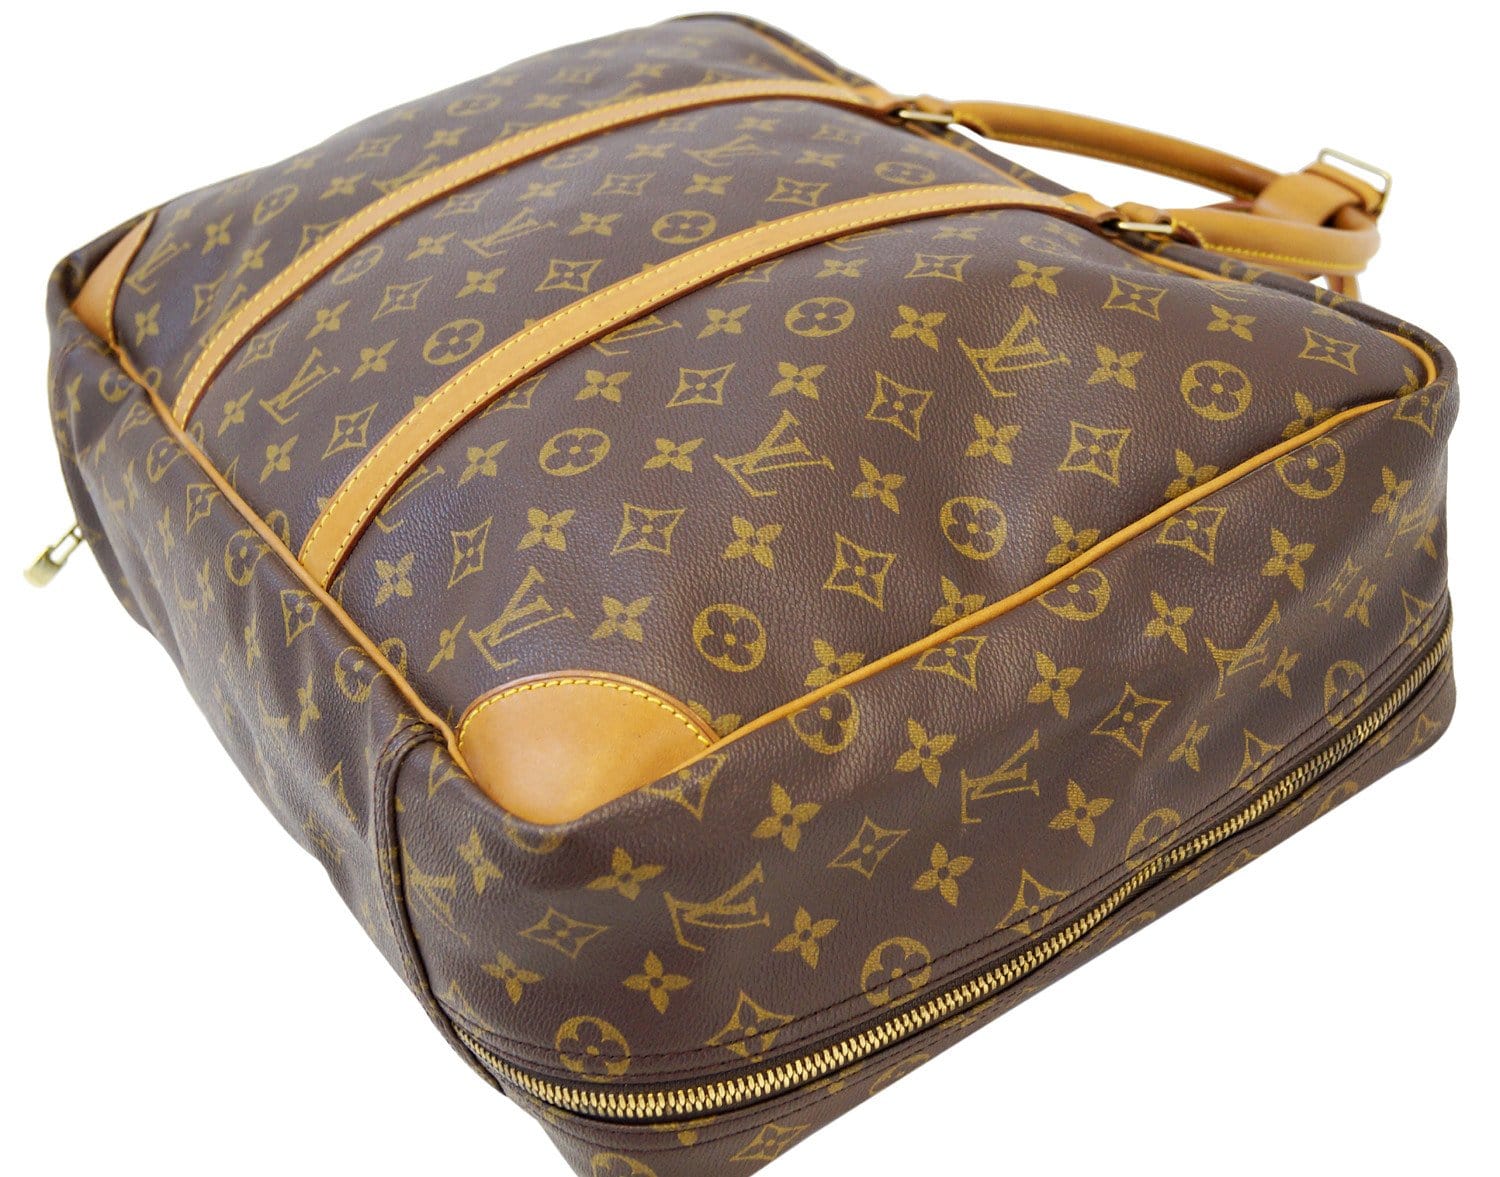 Authenticated Used Louis Vuitton Boston Bag Sirius 45 Brown Beige